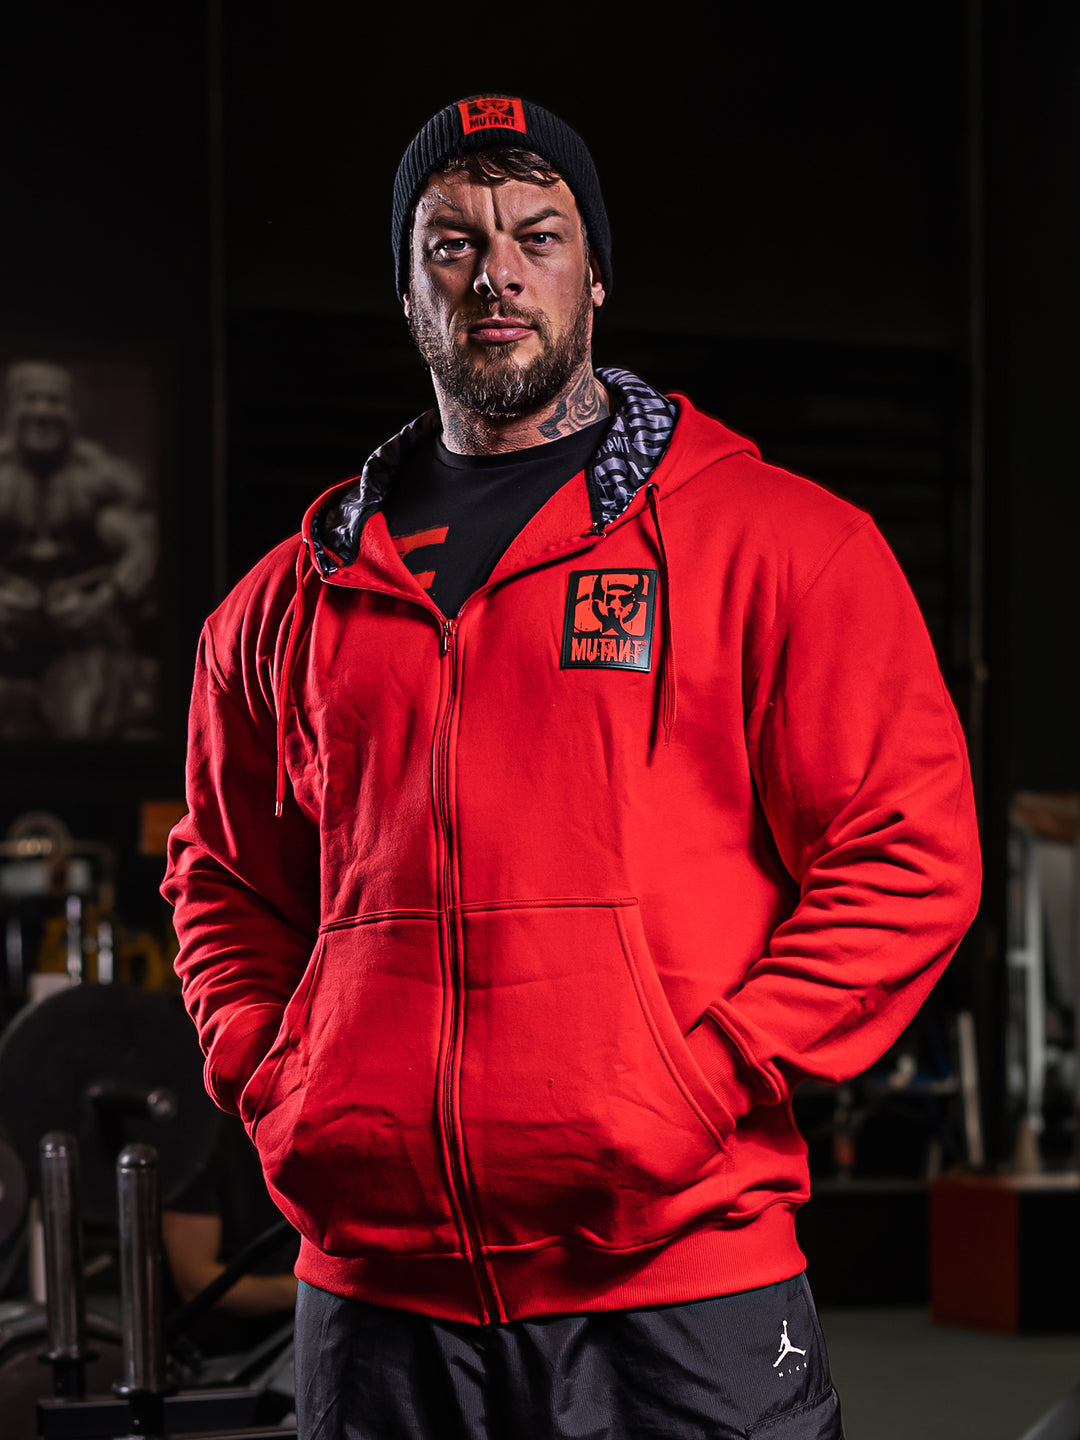 Mutant athlete Jamie Christian posing in the gym wearing Red Mutant Patched Zip-Up Gym Hoodie with black and red Mutant logo patch on left chest. Two pockets and grey hood lining with watermarked Mutant logo.